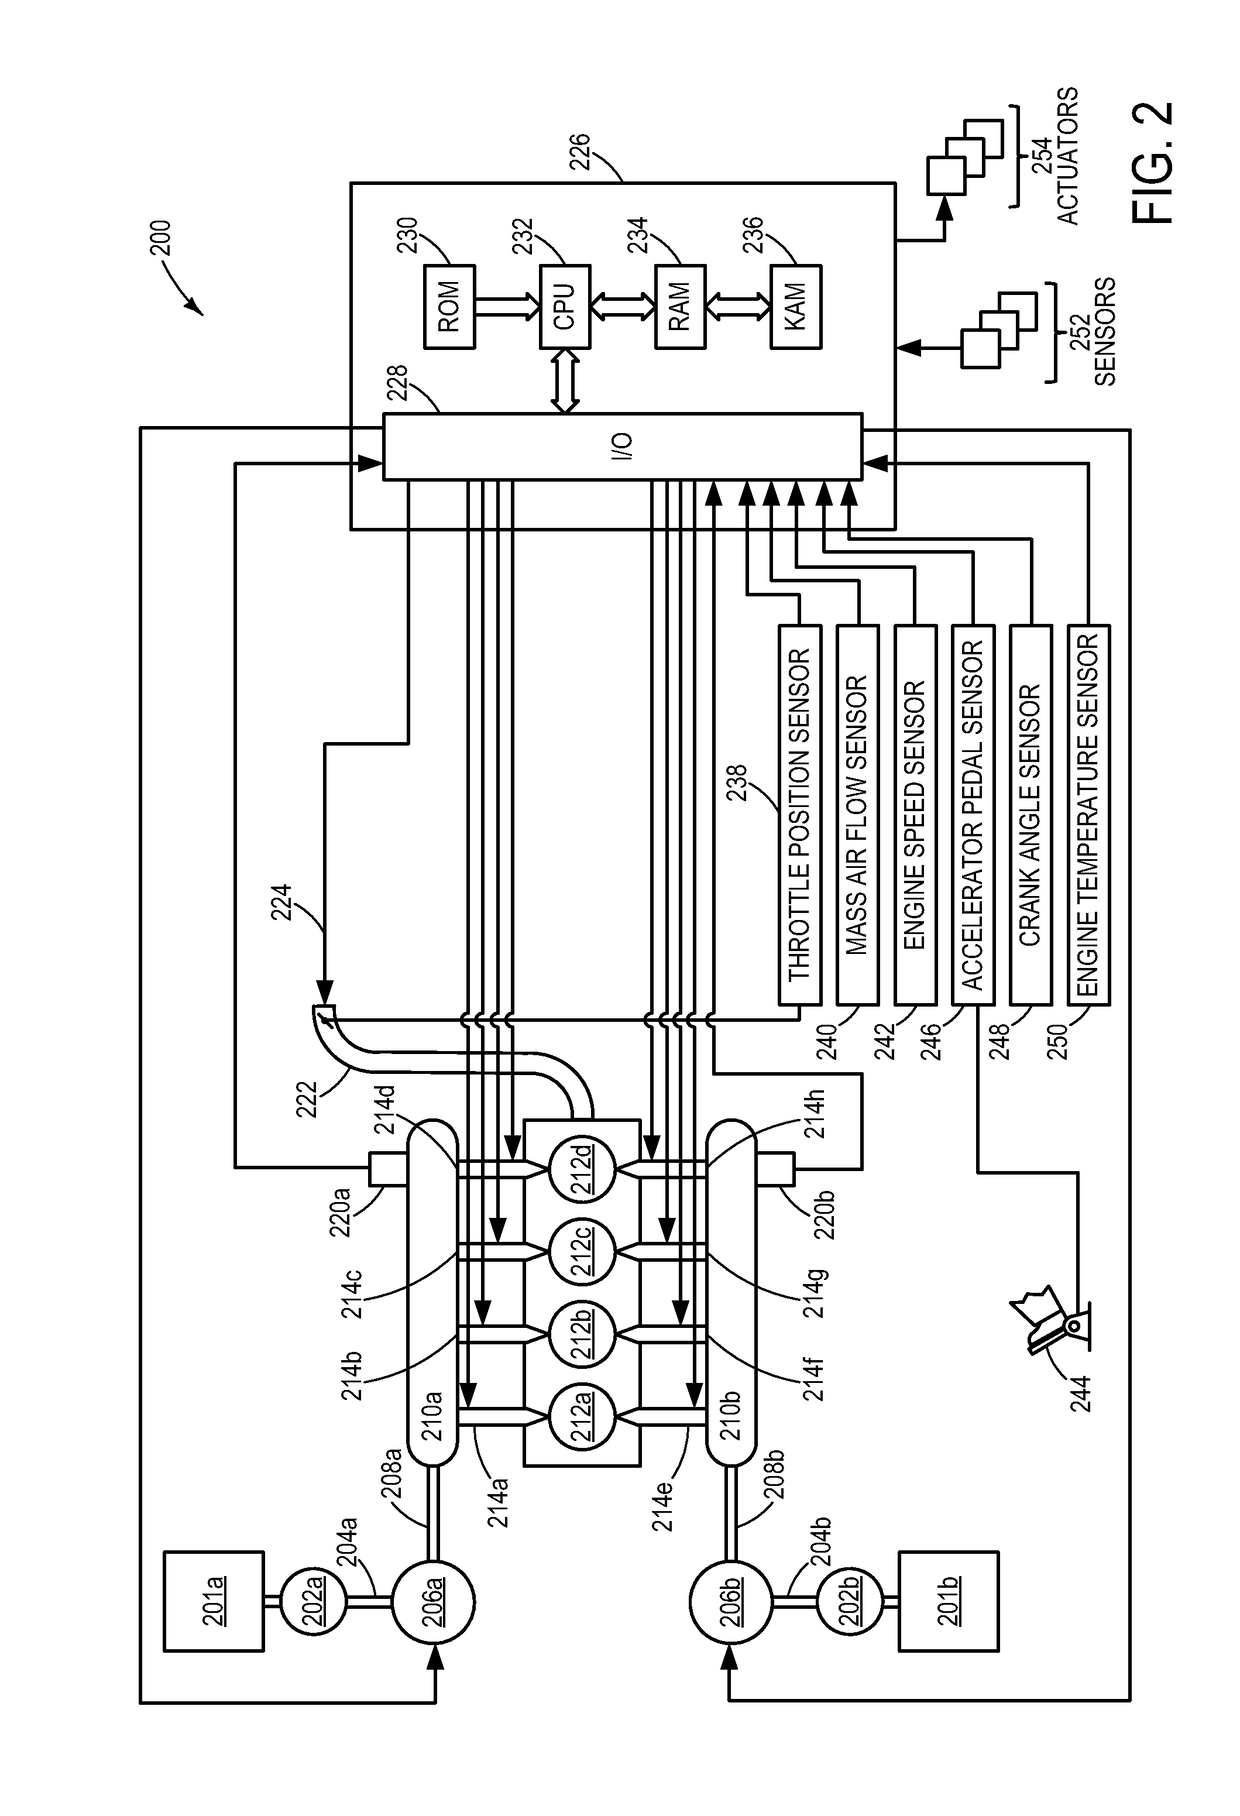 Fuel injector diagnostic for dual fuel engine